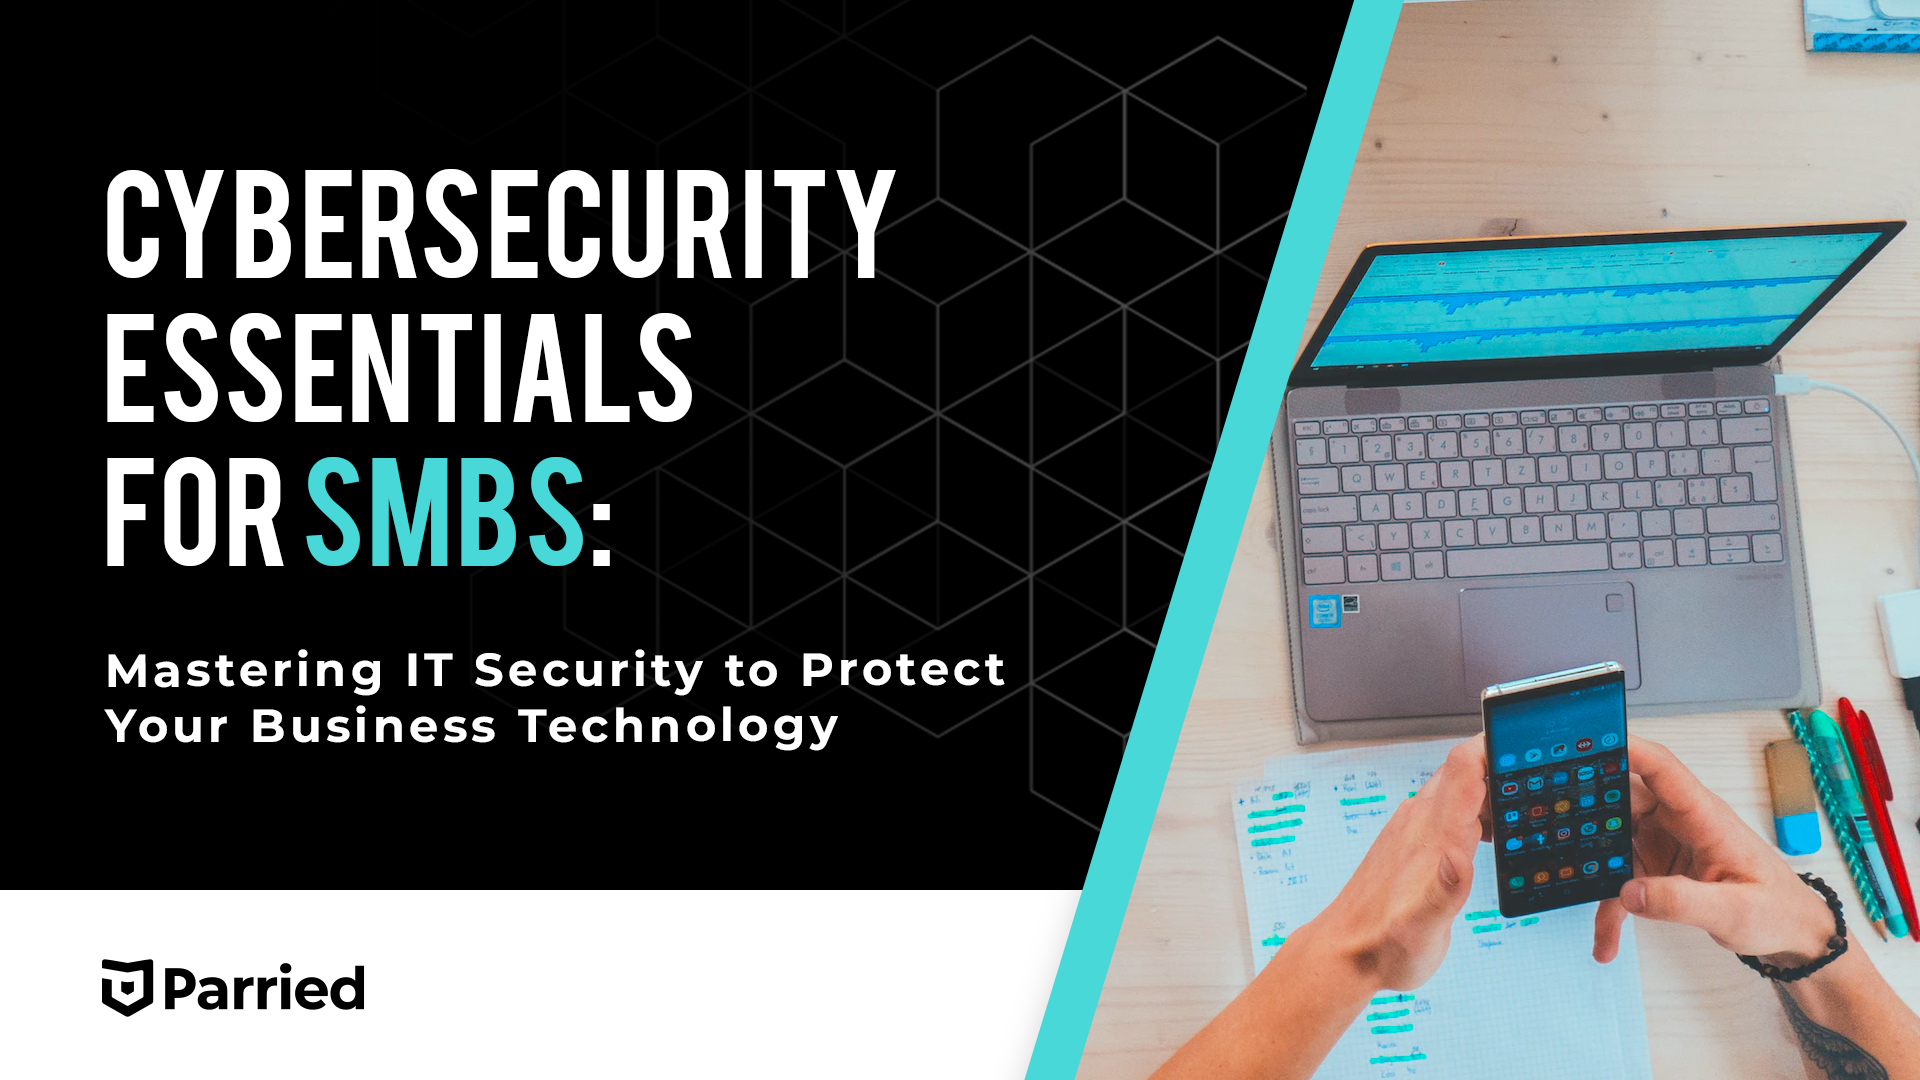 A person sits to attend a webinar on cybersecurity essentials for SMBs.